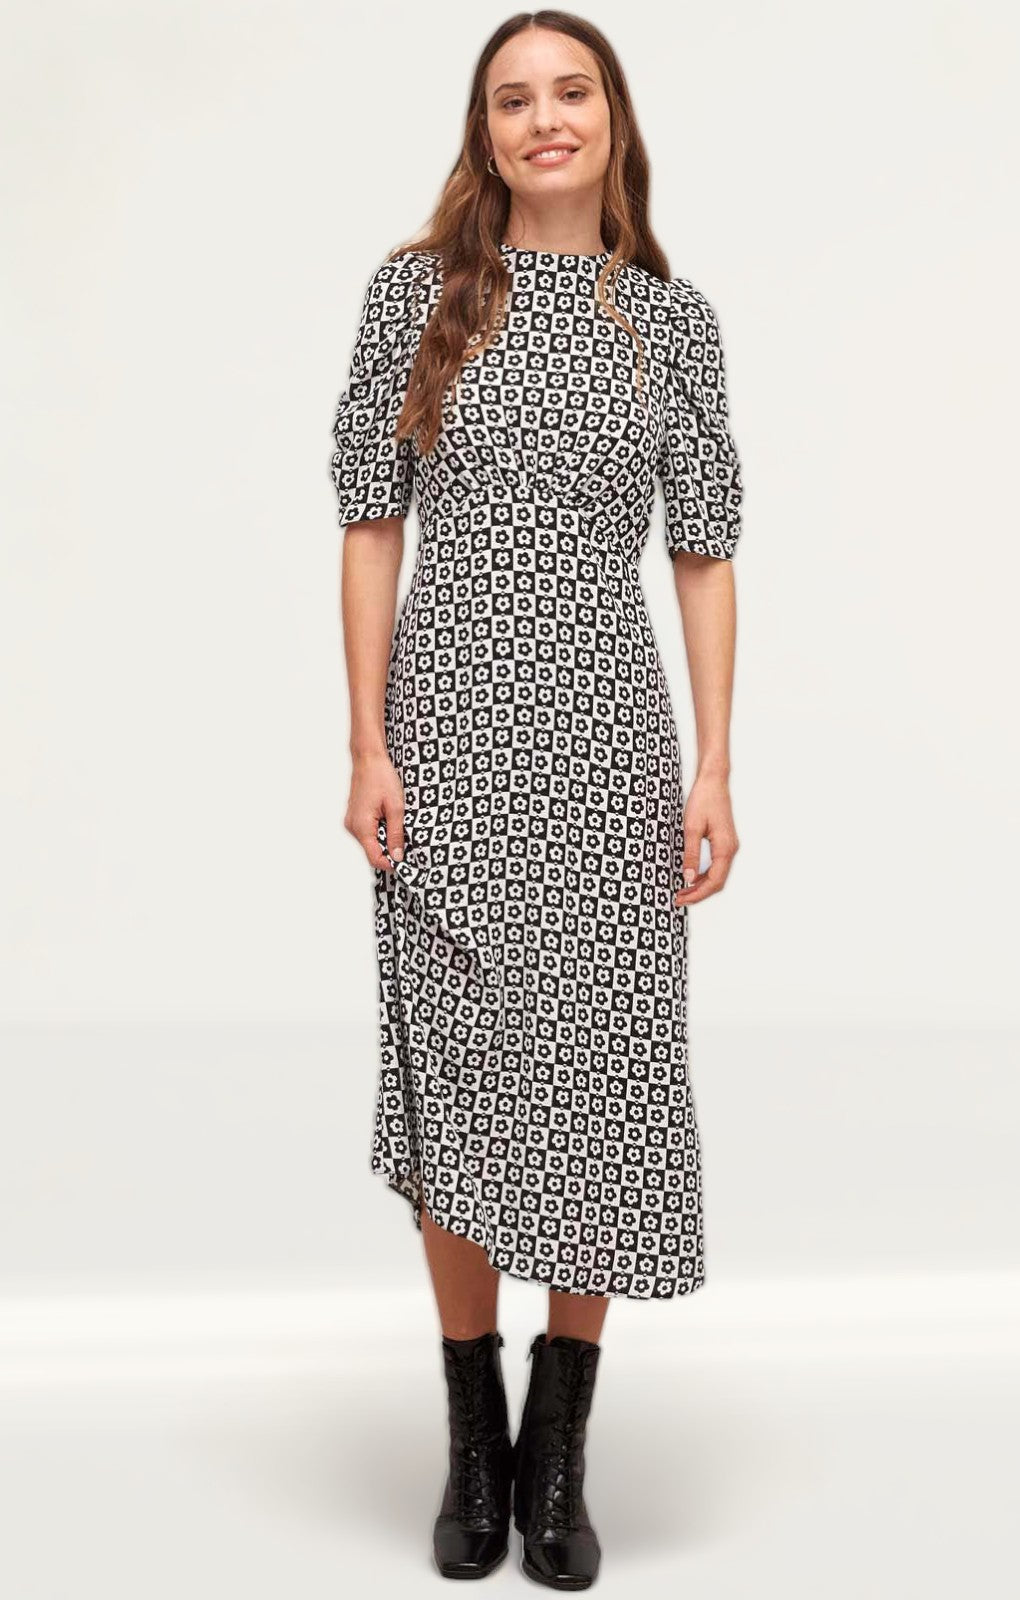 Nobody's Child Checkerboard Evie Ruched Sleeve Midi Dress product image